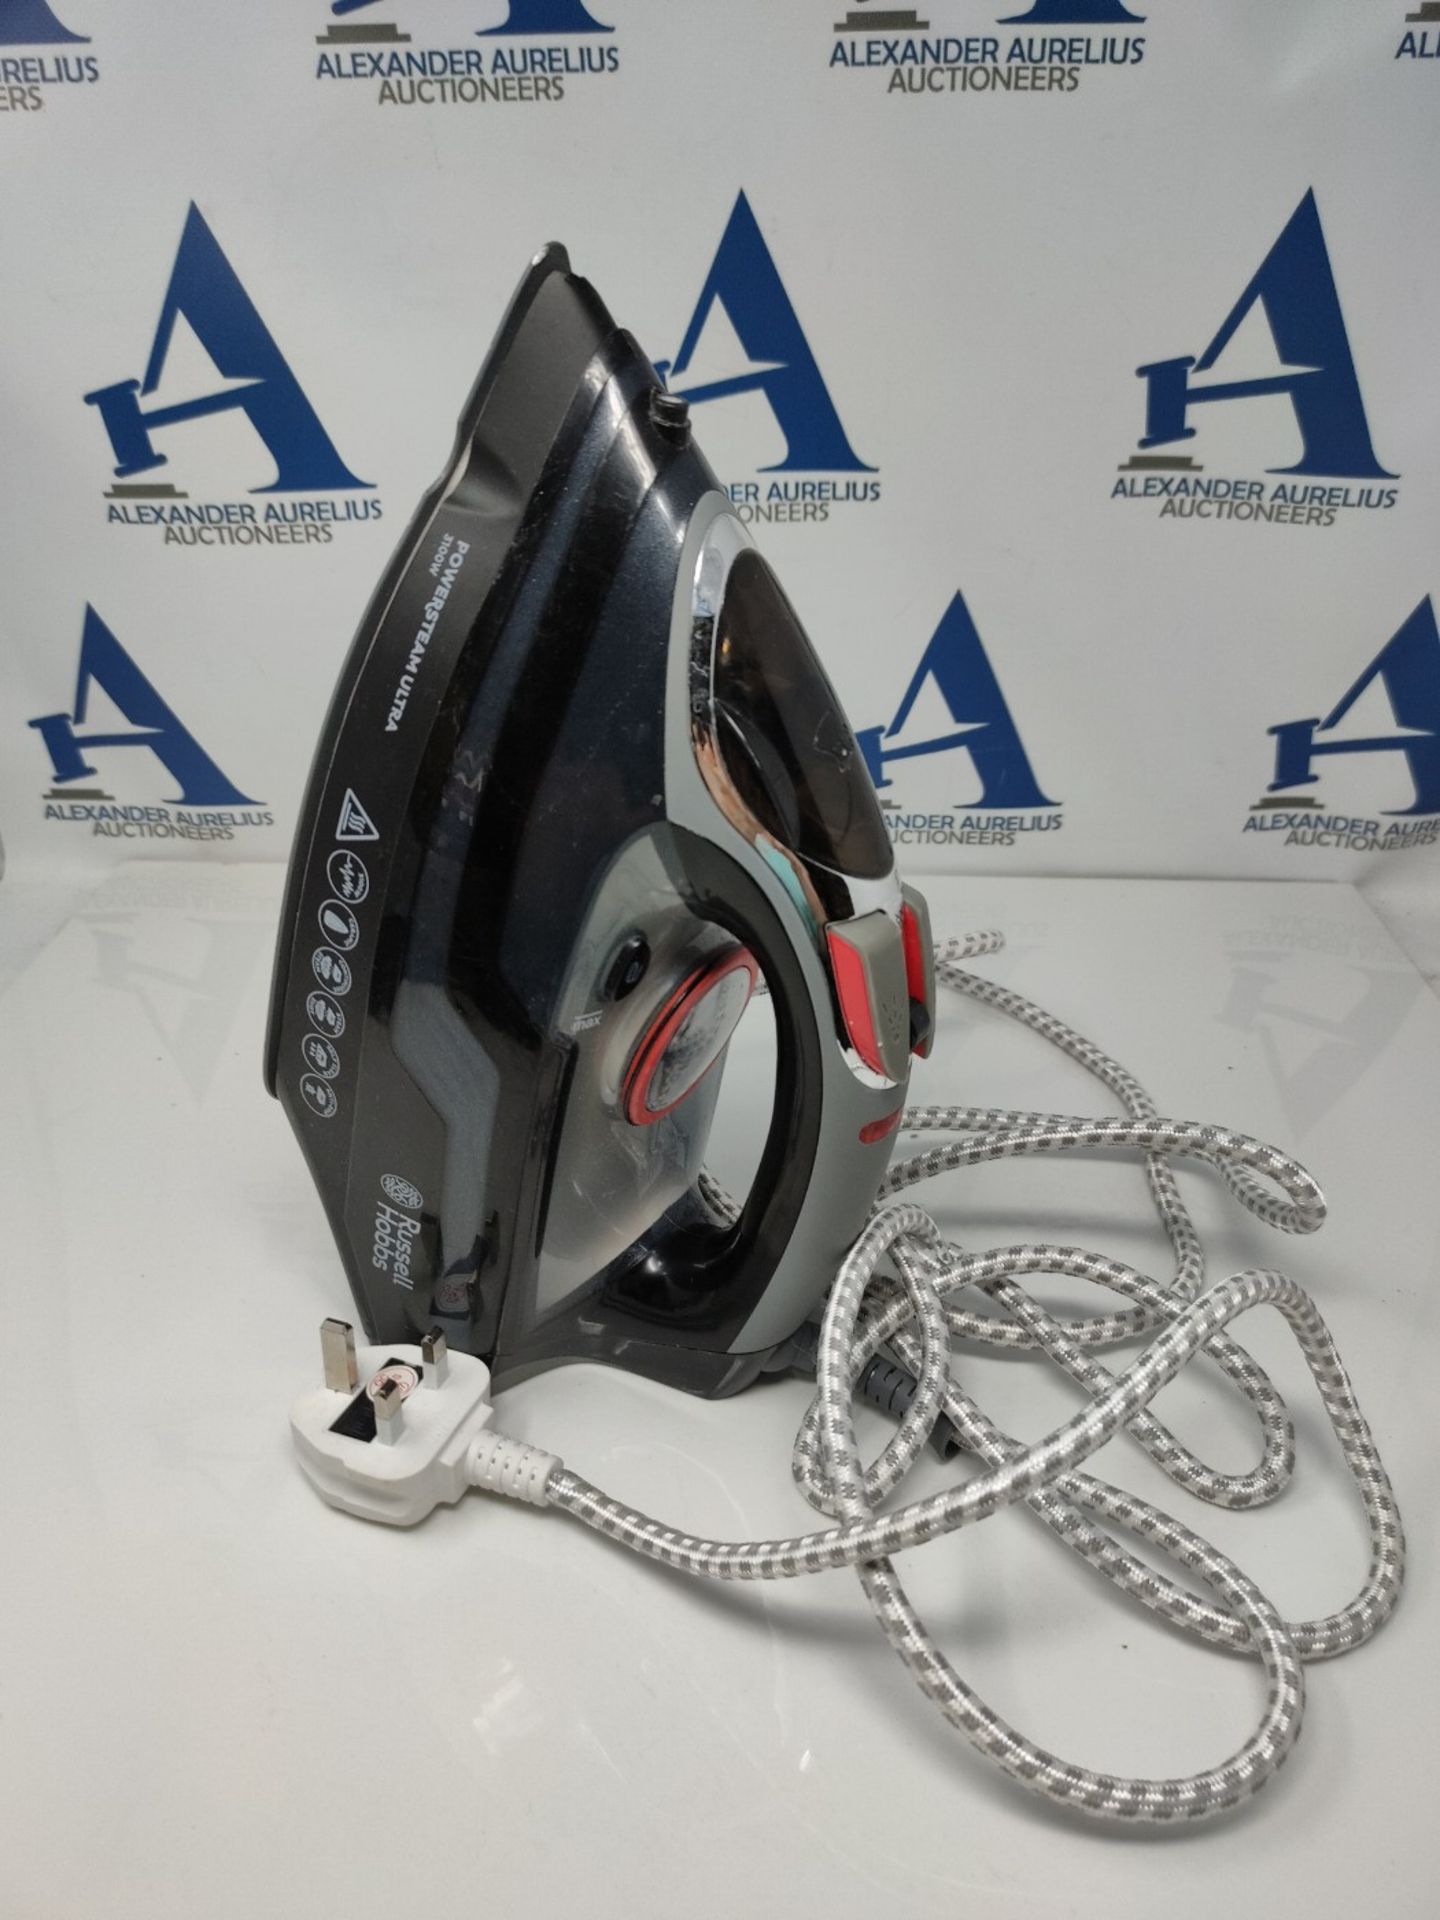 Russell Hobbs Powersteam Ultra 3100 W Vertical Steam Iron 20630 - Black and Grey - Image 3 of 3